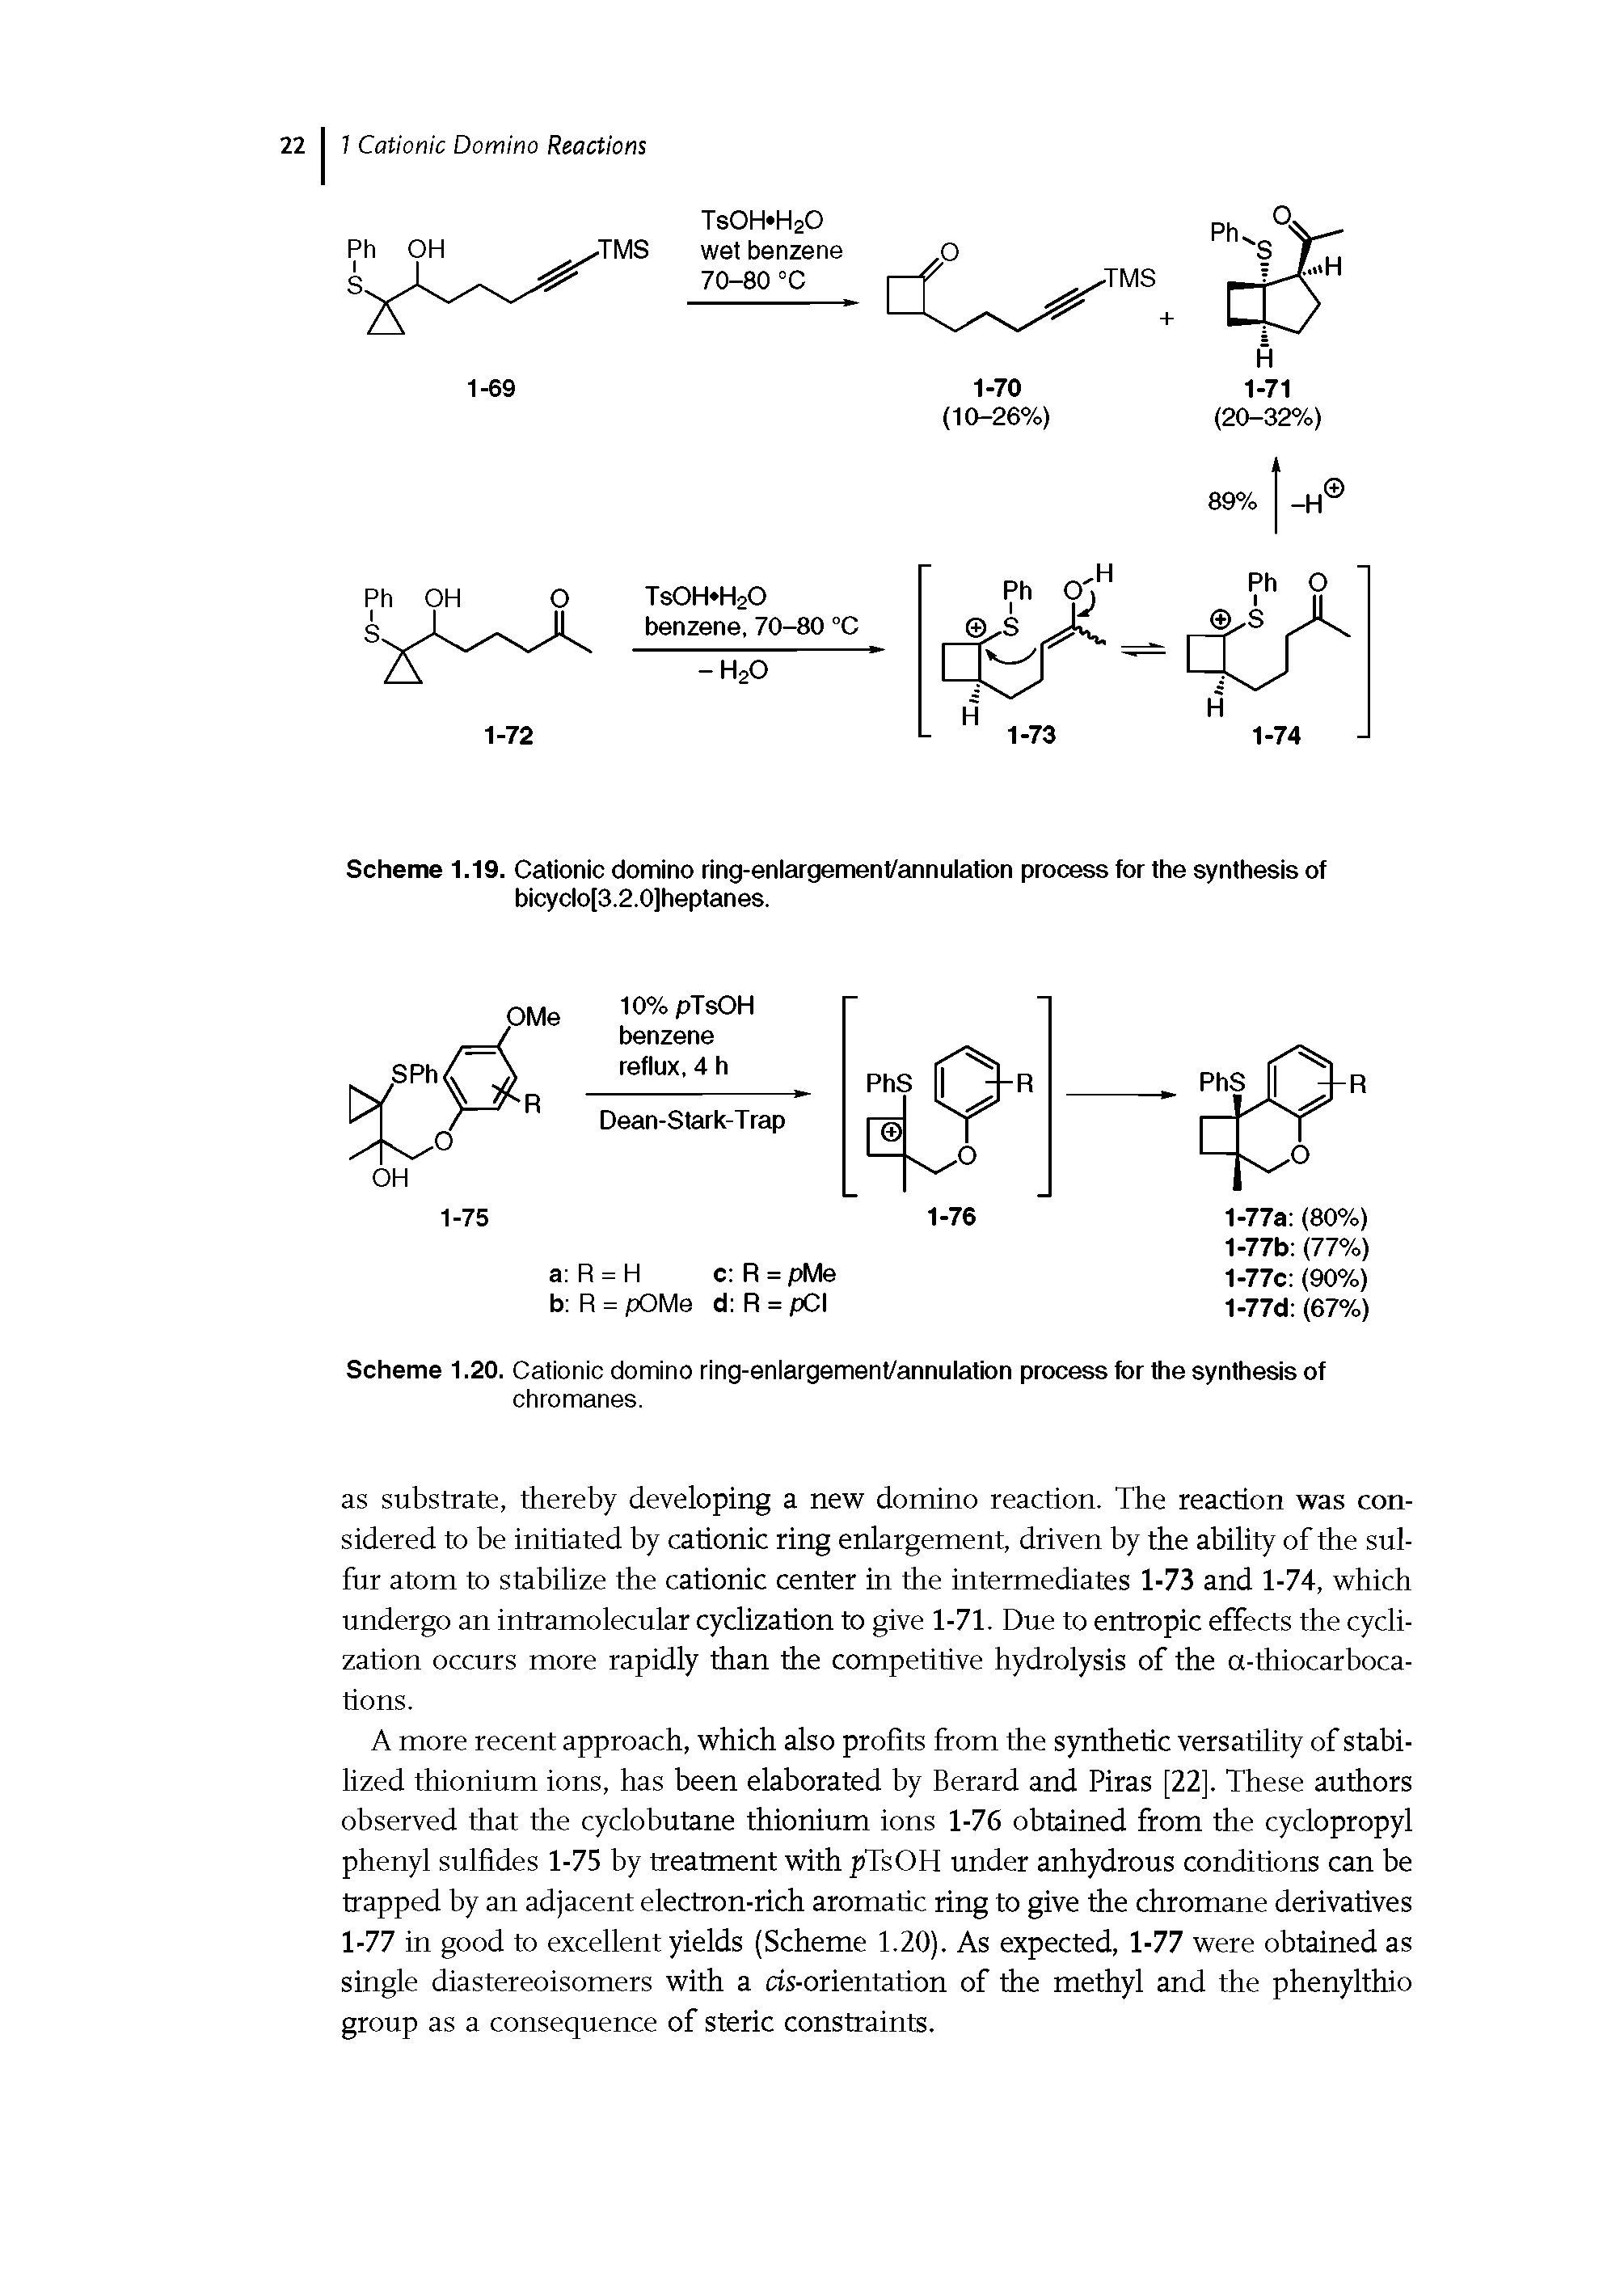 Scheme 1.19. Cationic domino ring-enlargement/annulation process for the synthesis of bicyclo[3.2.0]heptanes.